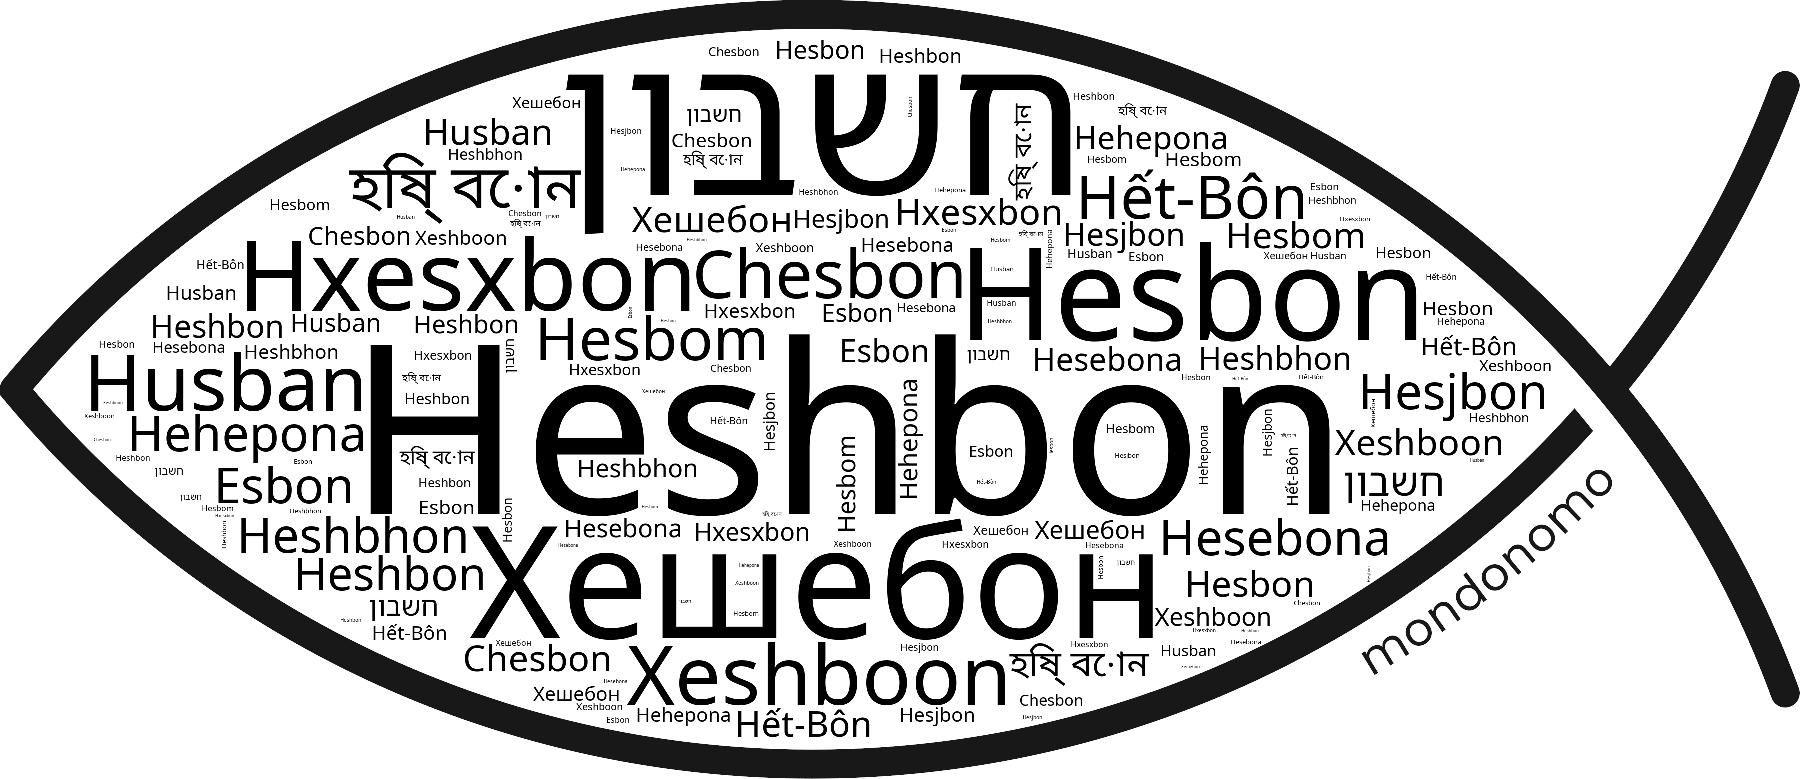 Name Heshbon in the world's Bibles